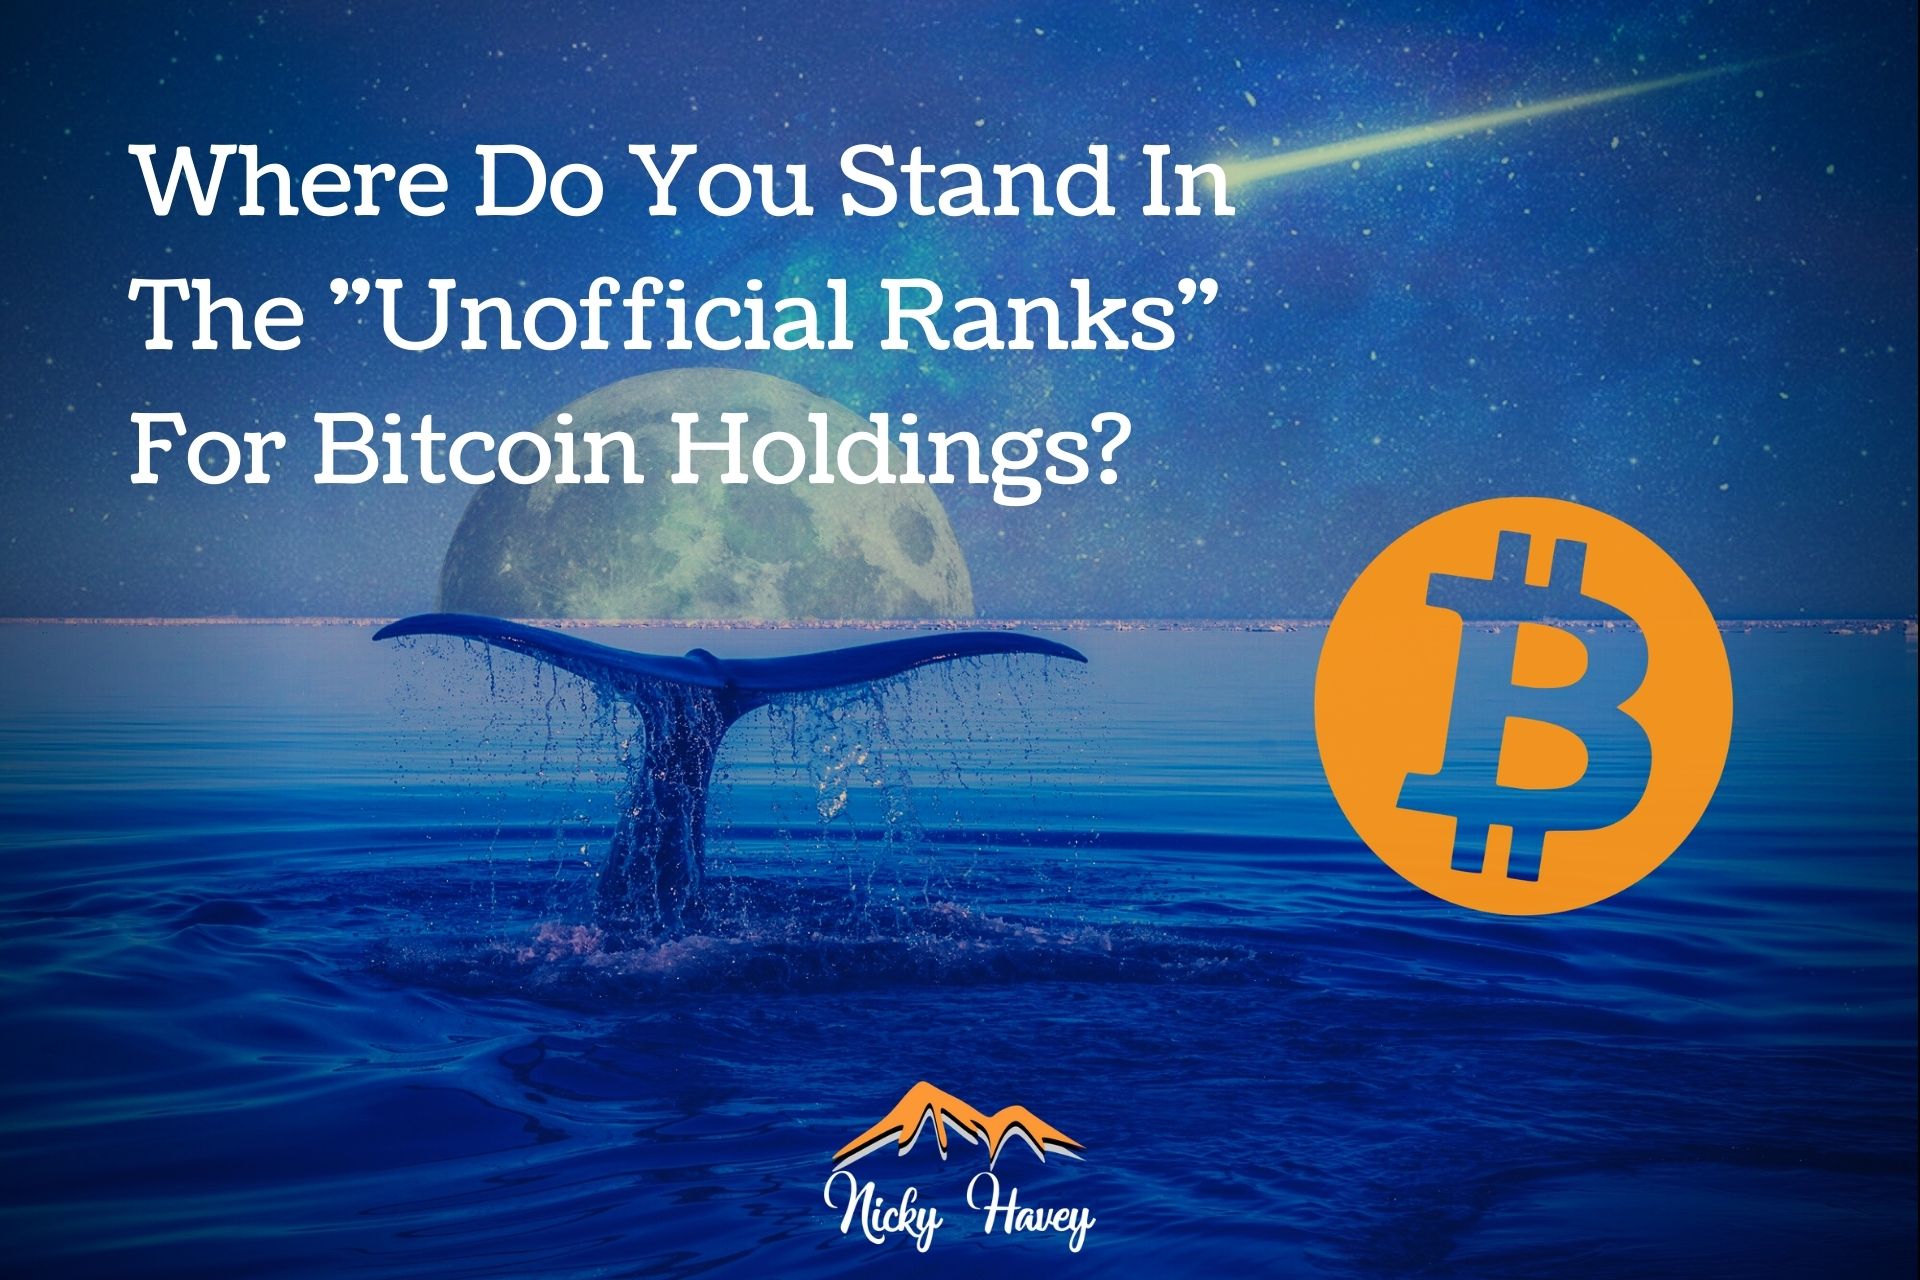 @nickyhavey/where-do-you-stand-in-the-unofficial-ranks-for-bitcoin-holdings